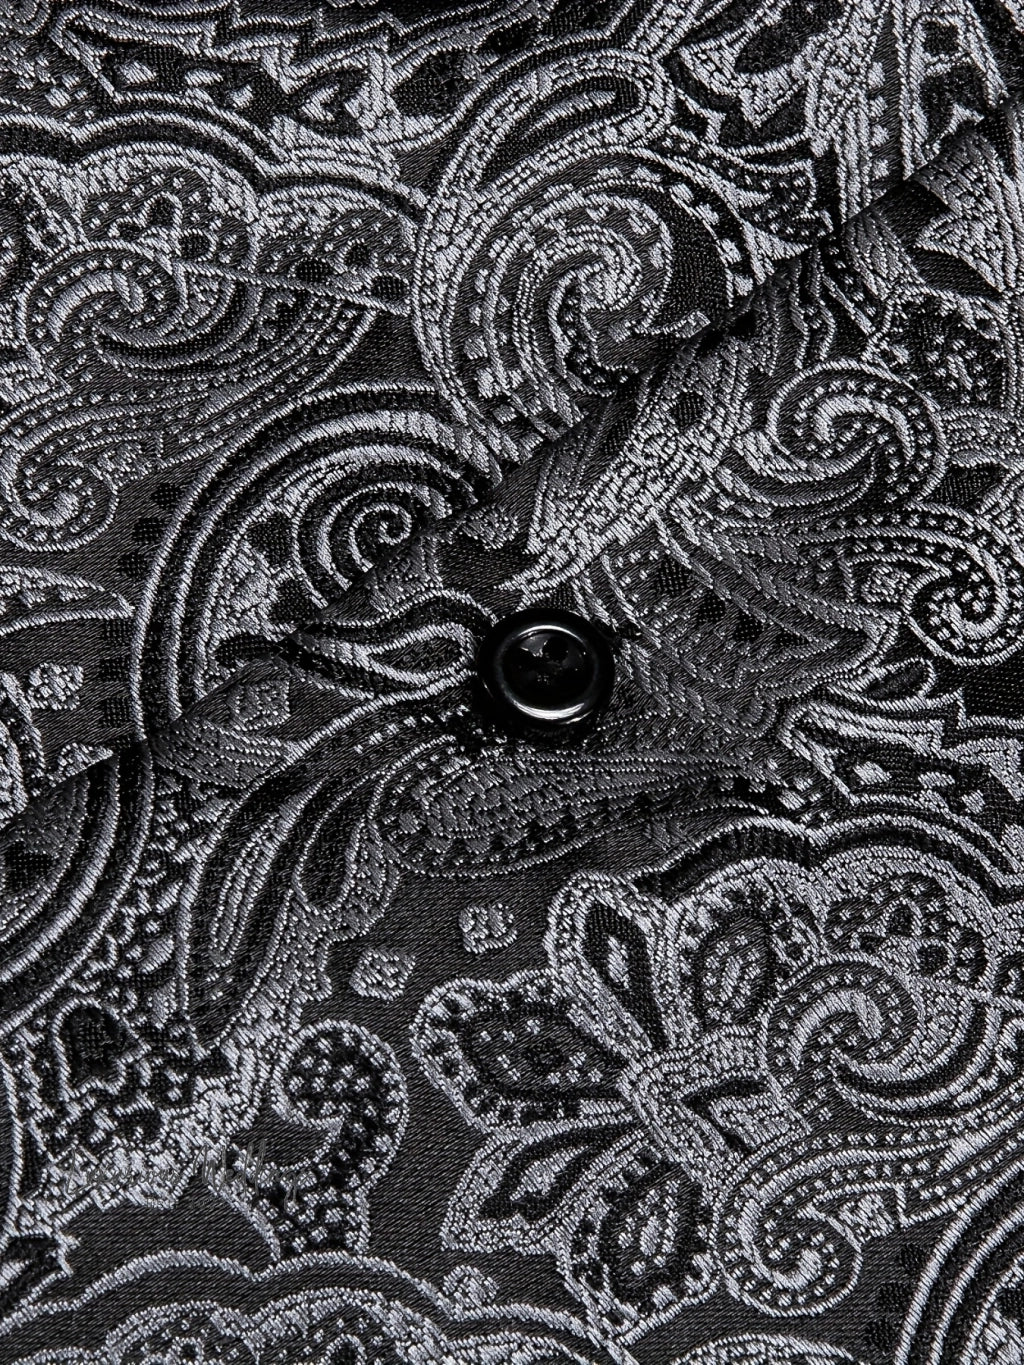 a close up of a black and white paisley pattern